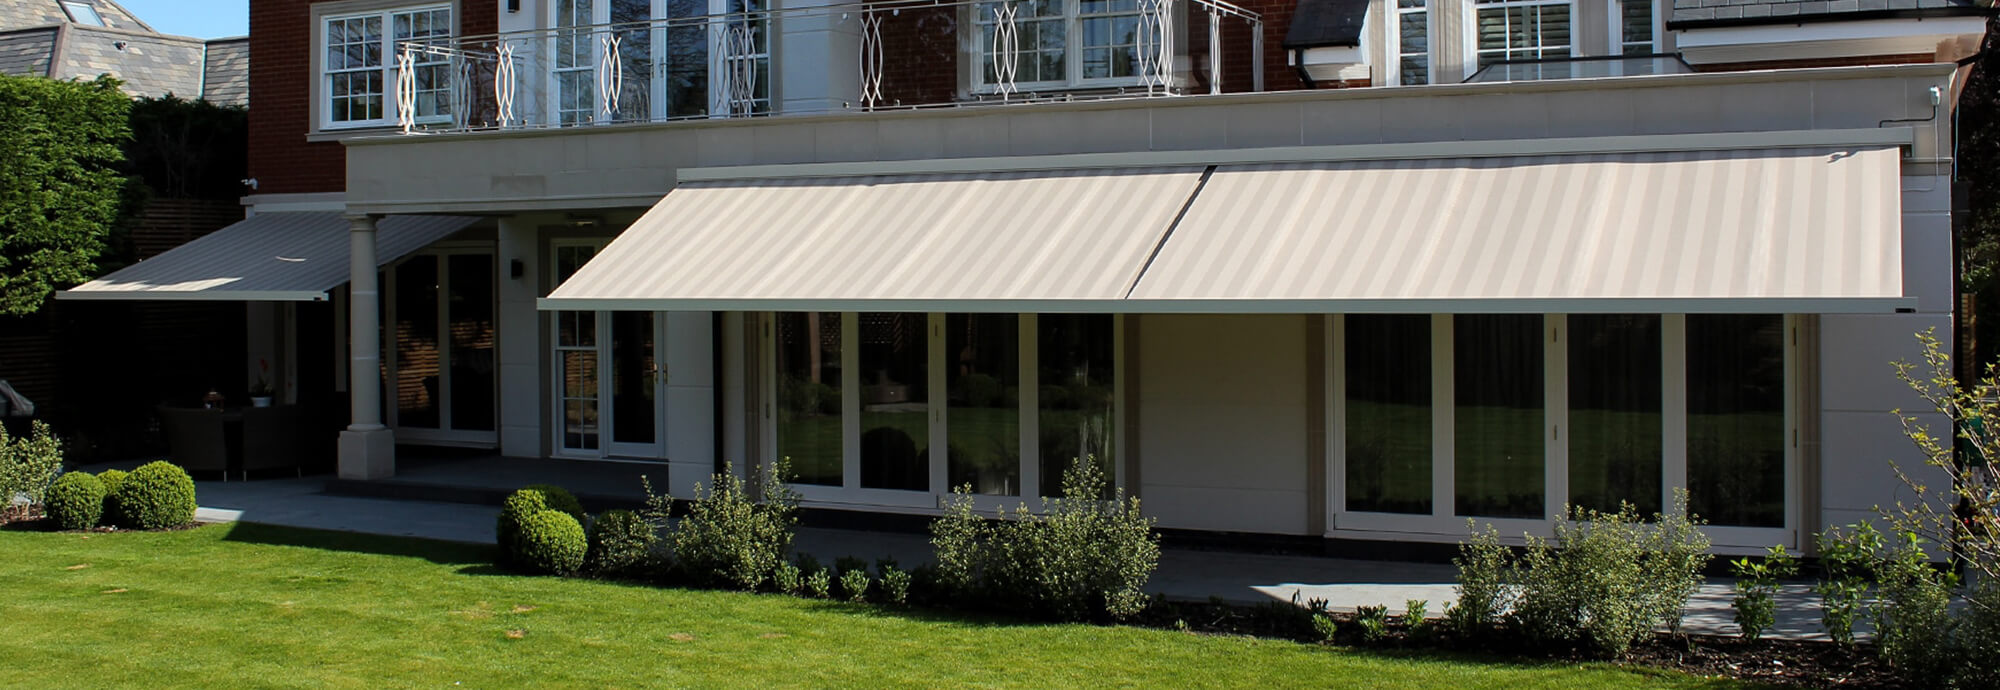 awnings outdoor sun shades